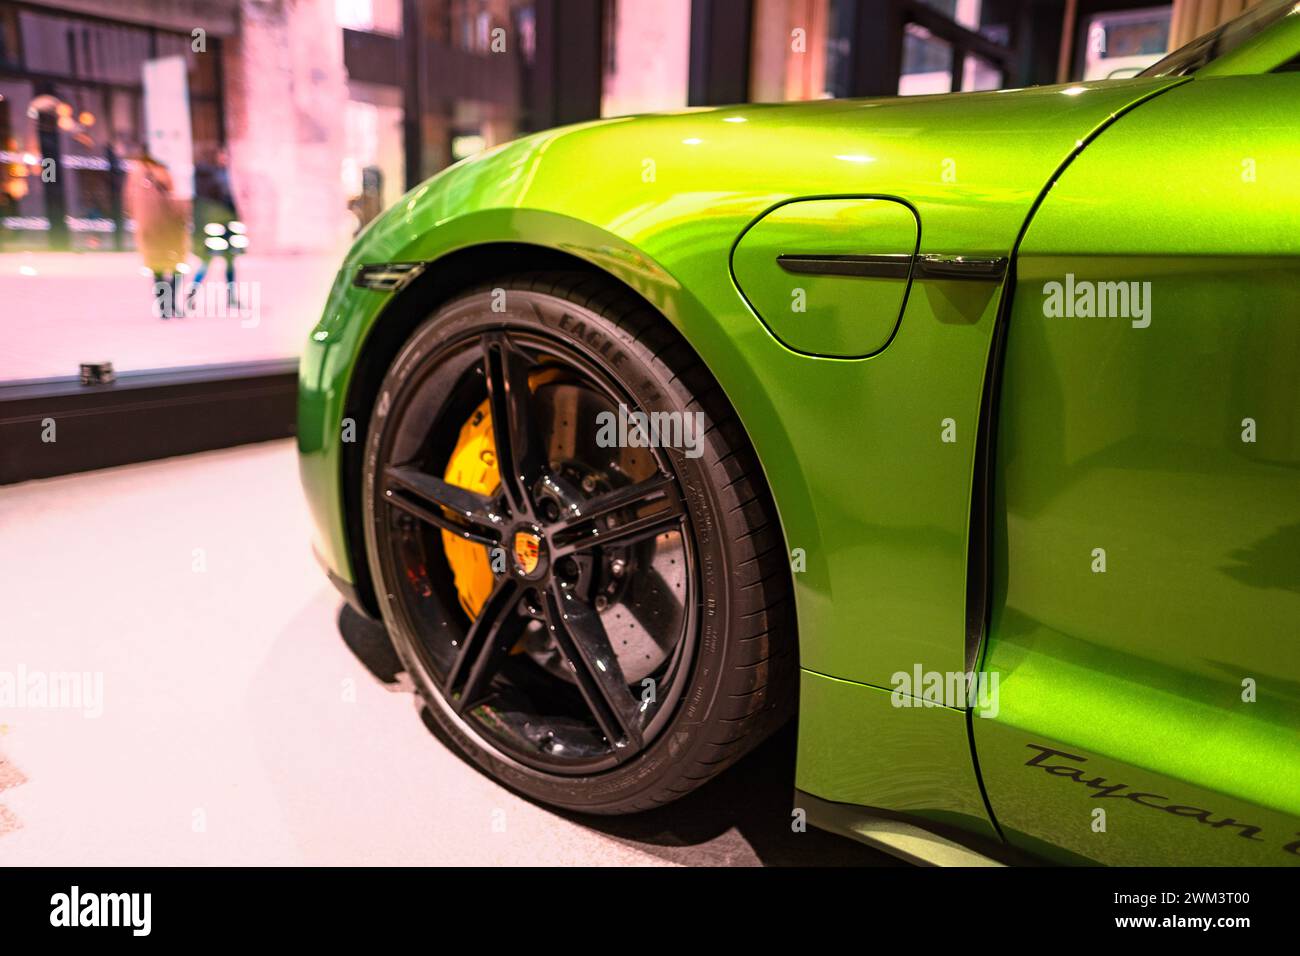 wheel of new green Porsche Taycan Turbo S battery-electric sports Car, sedan Porsche Automobil Holding in showroom, Innovation in automotive industry Stock Photo